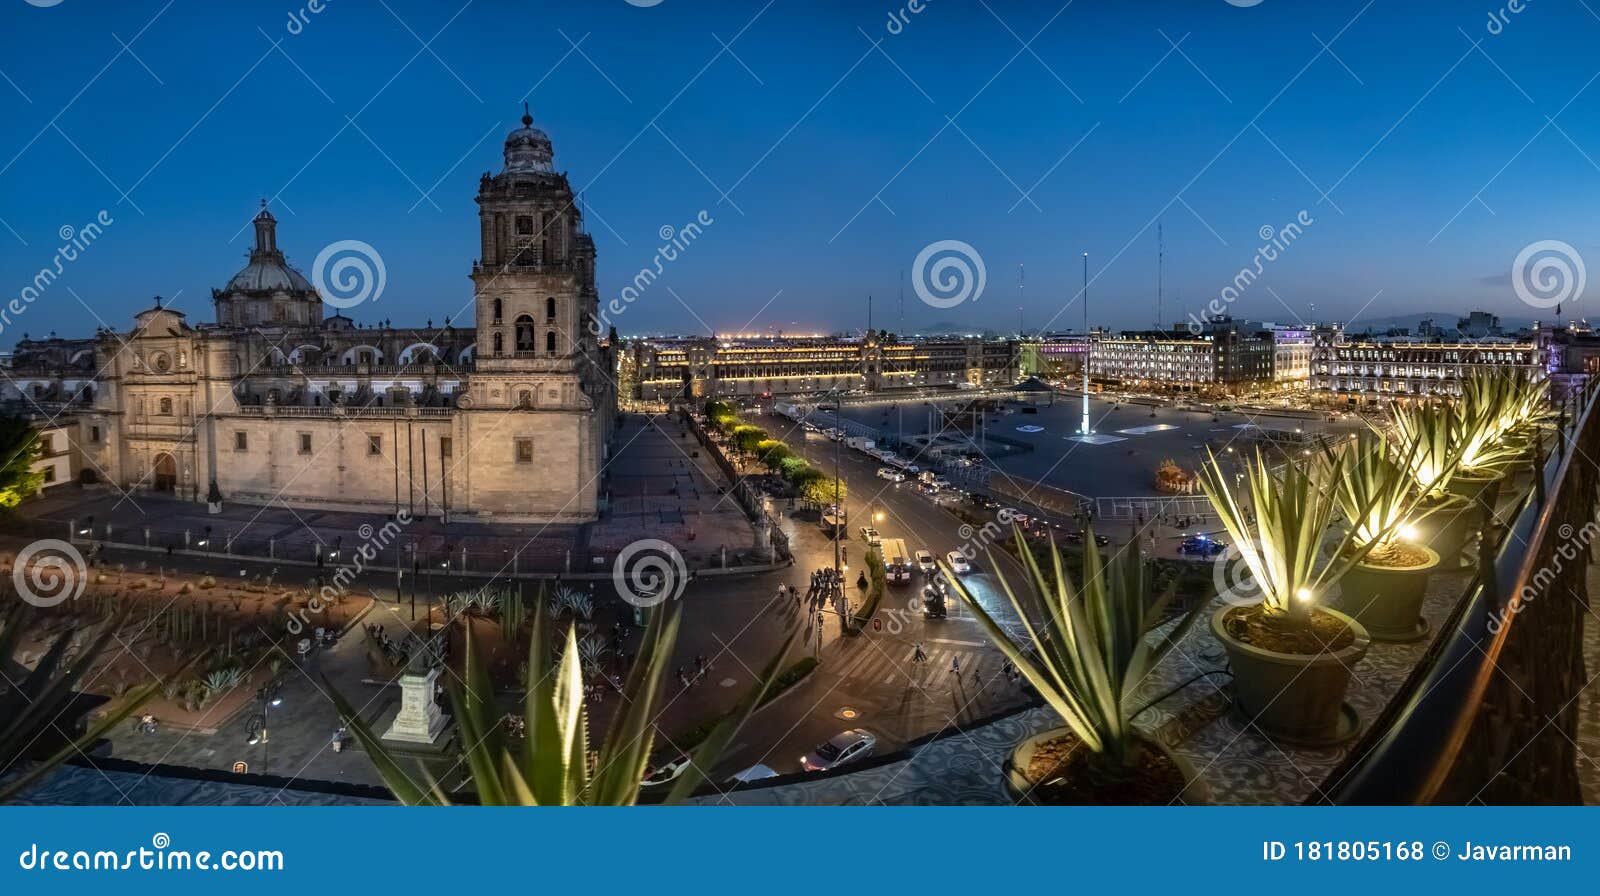 zocalo square and metropolitan cathedral of mexico city at night